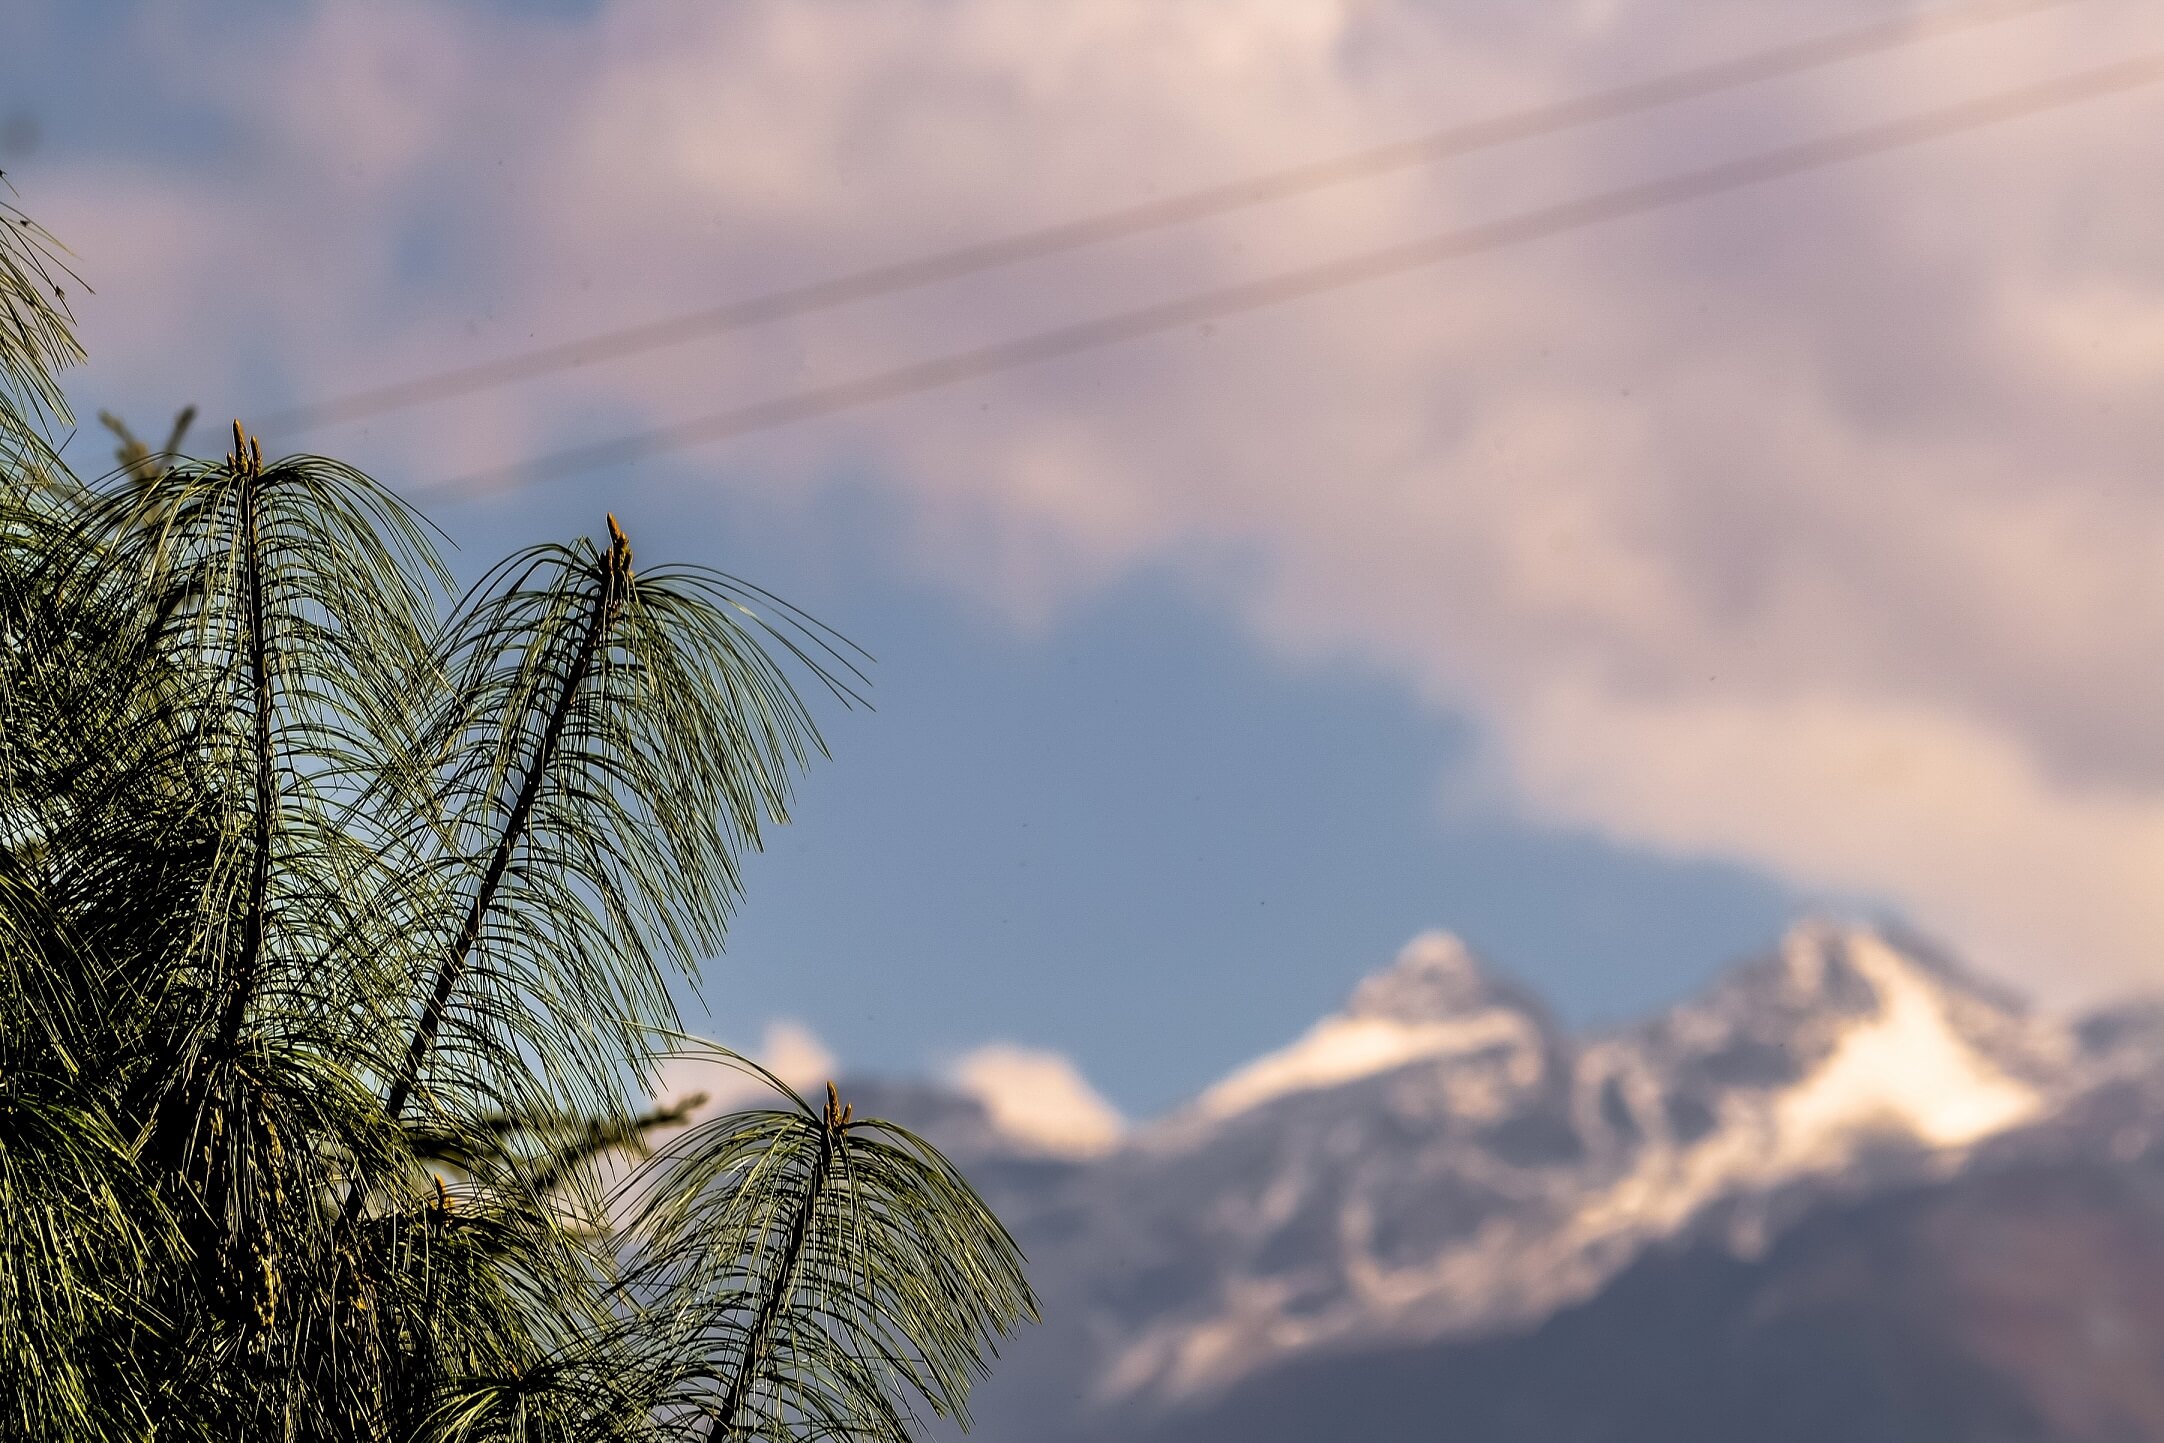 View of the Himalayas in the background in Himachal Pradesh, India